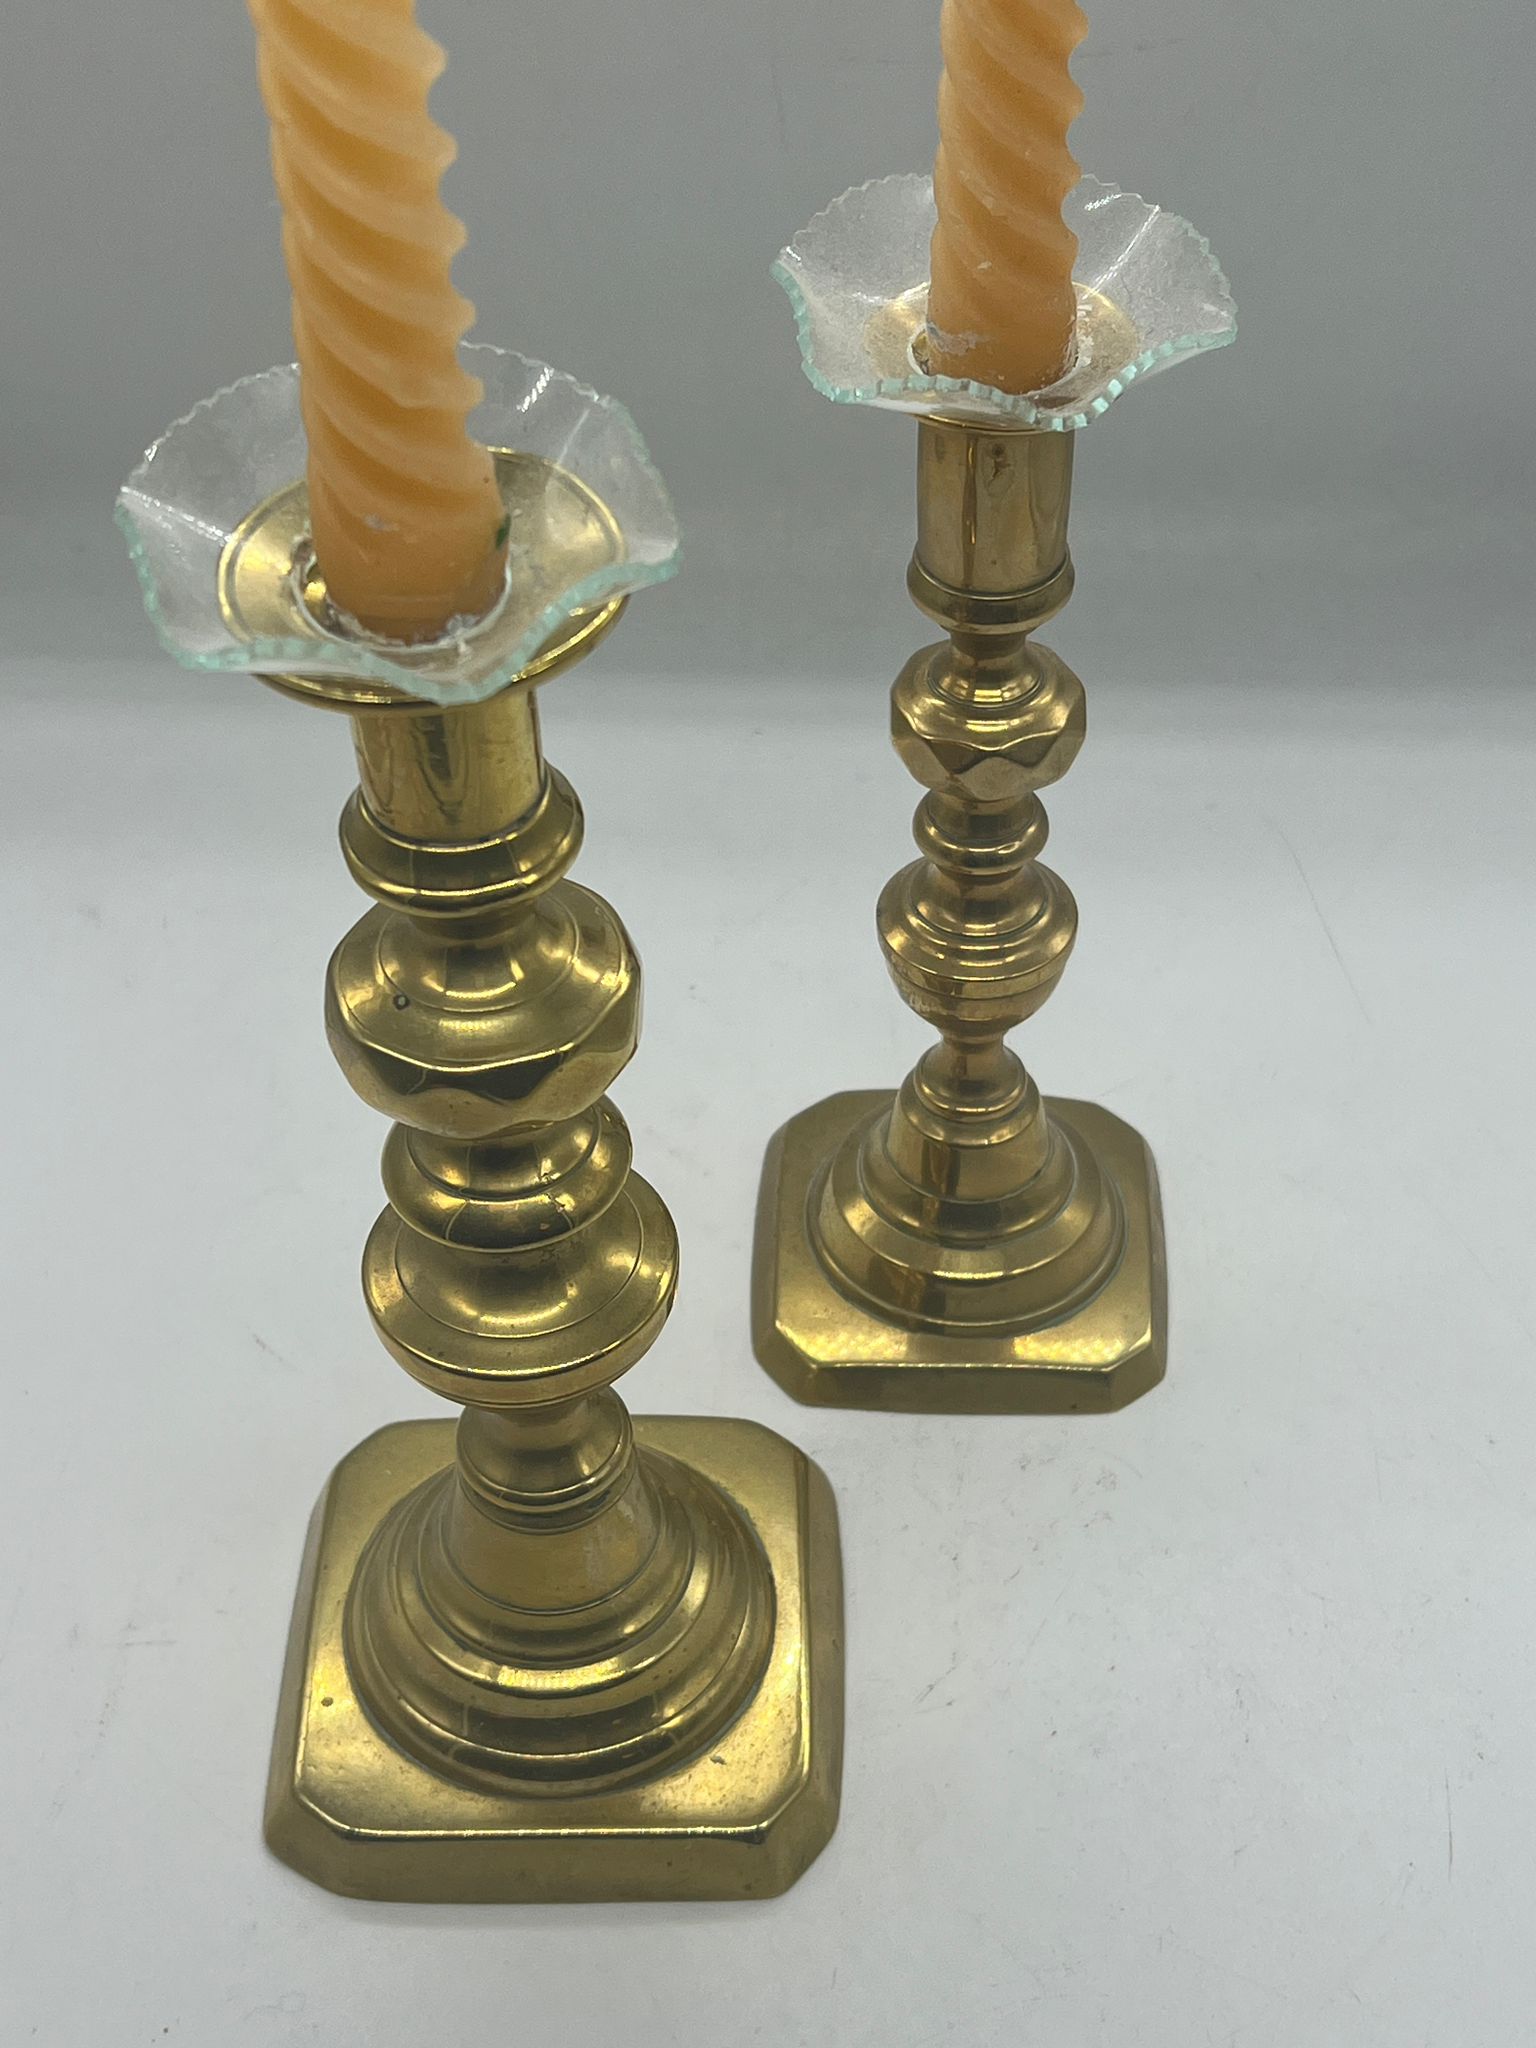 A pair of brass candlesticks with glass finials - Image 2 of 3